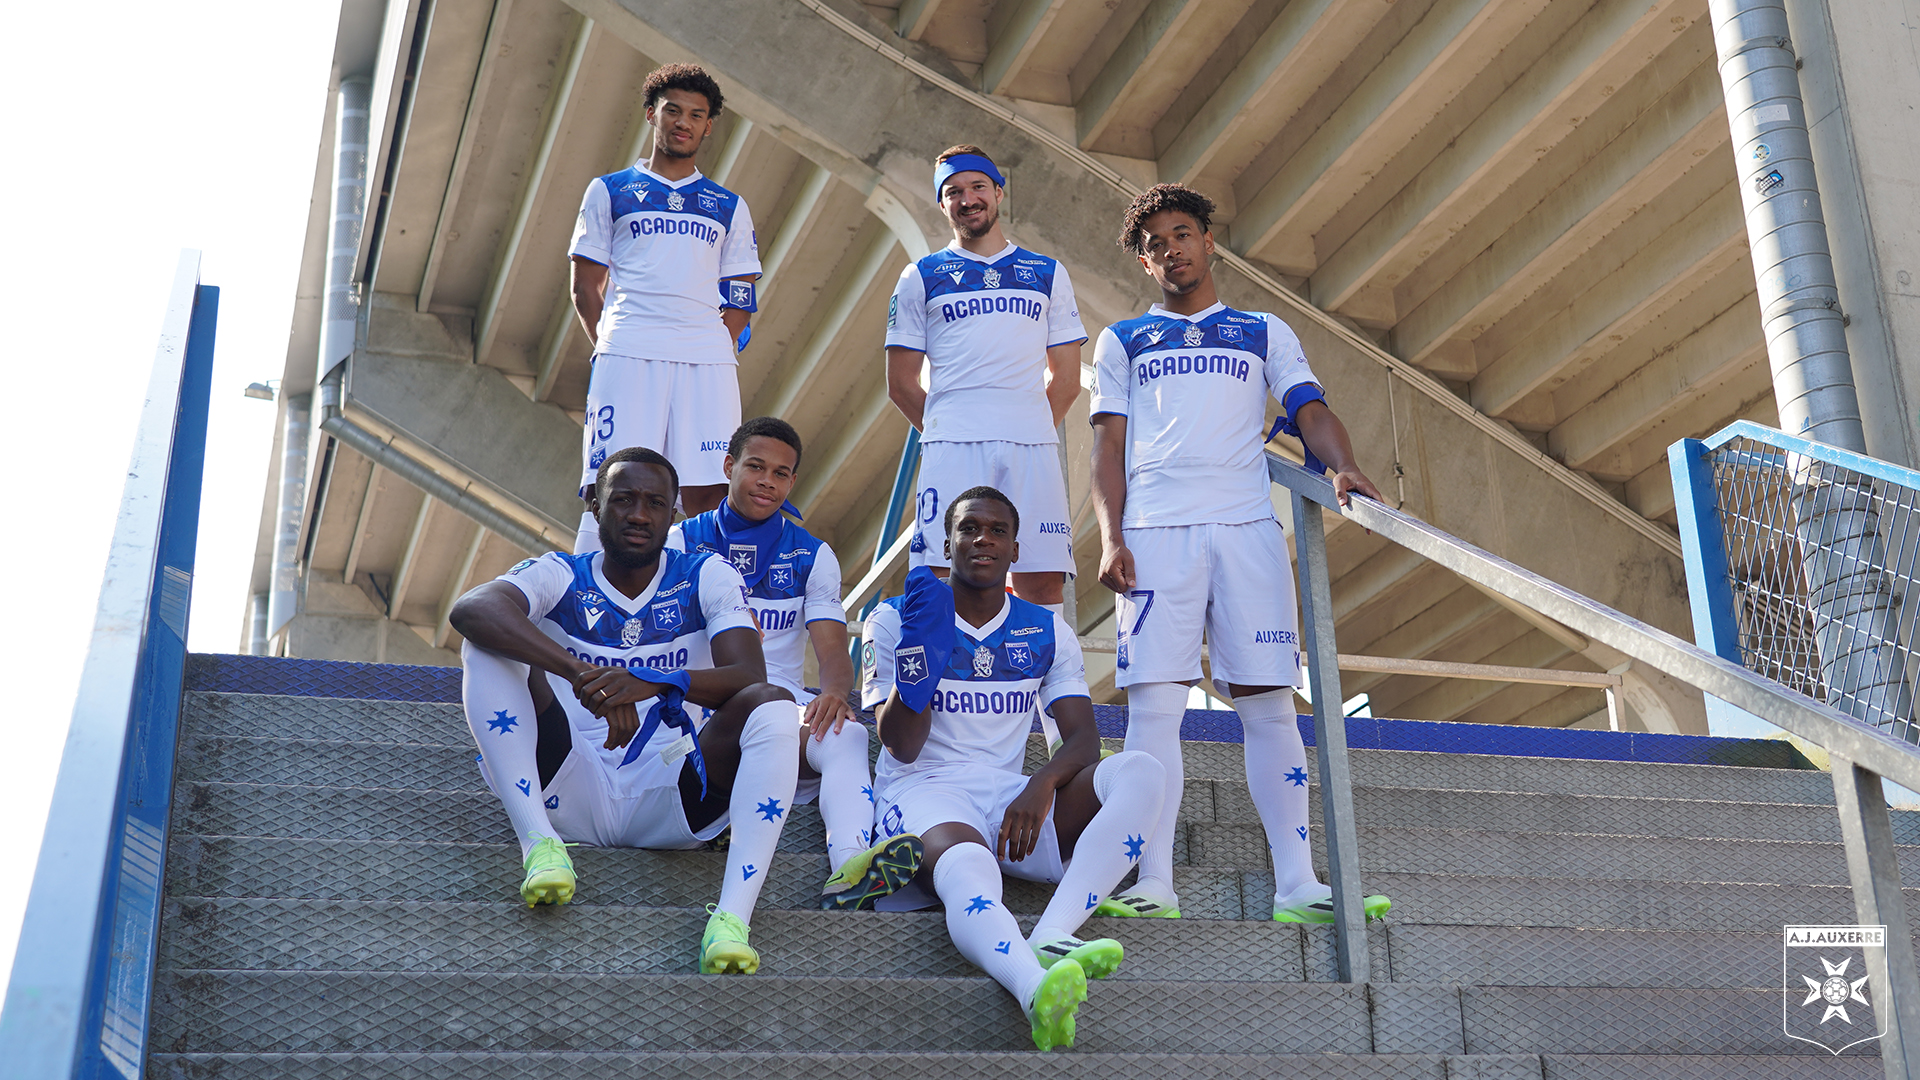 maillot auxerre